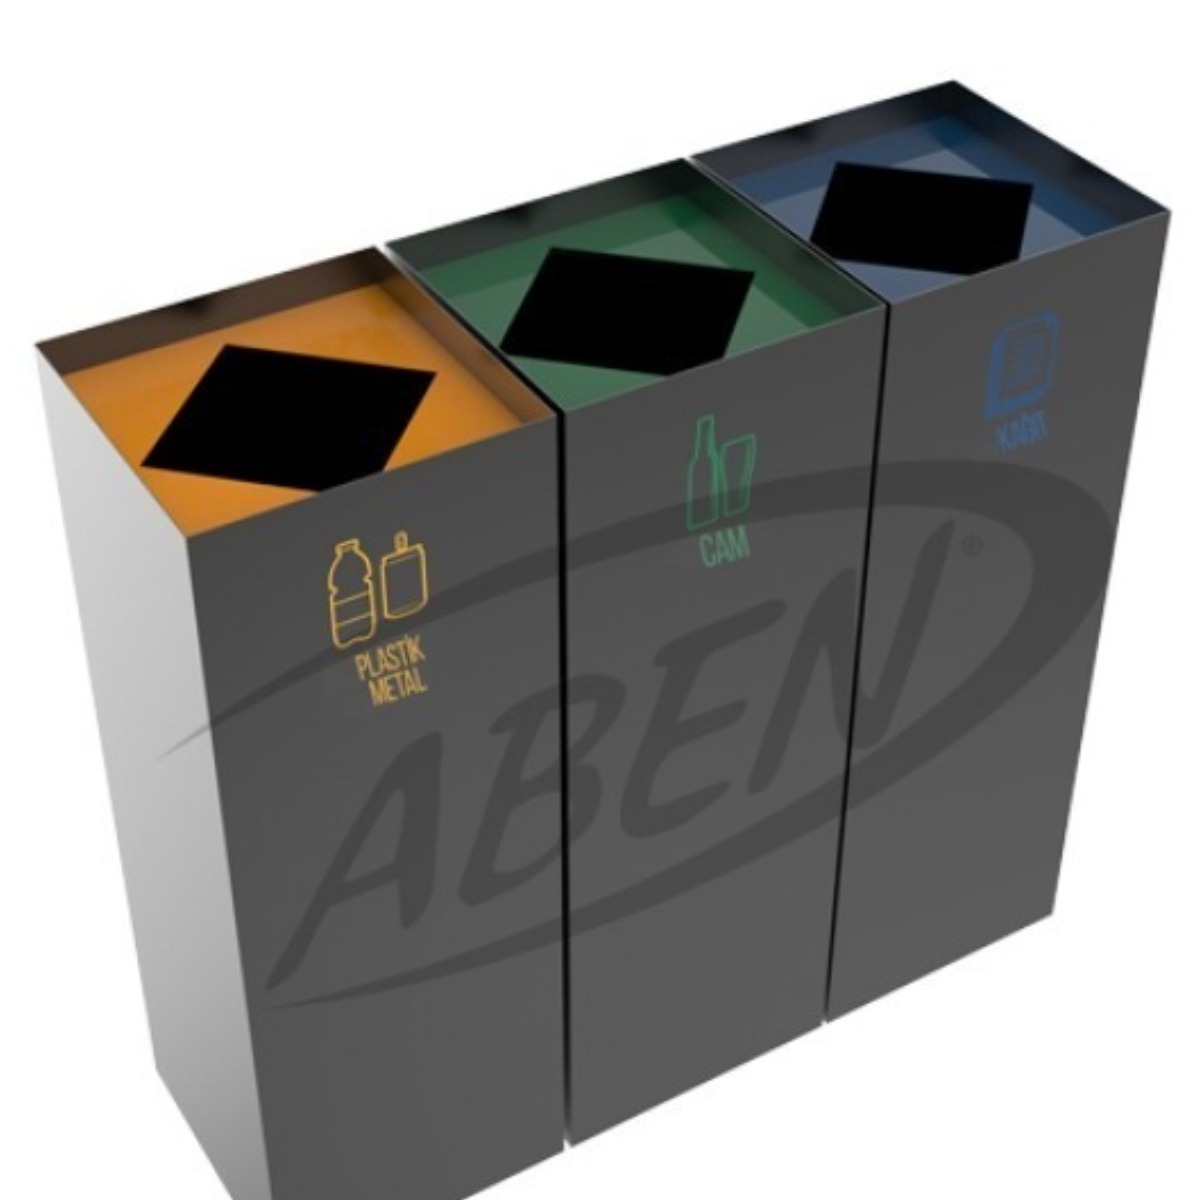 AB-791 3'Part Recycle Bin product logo